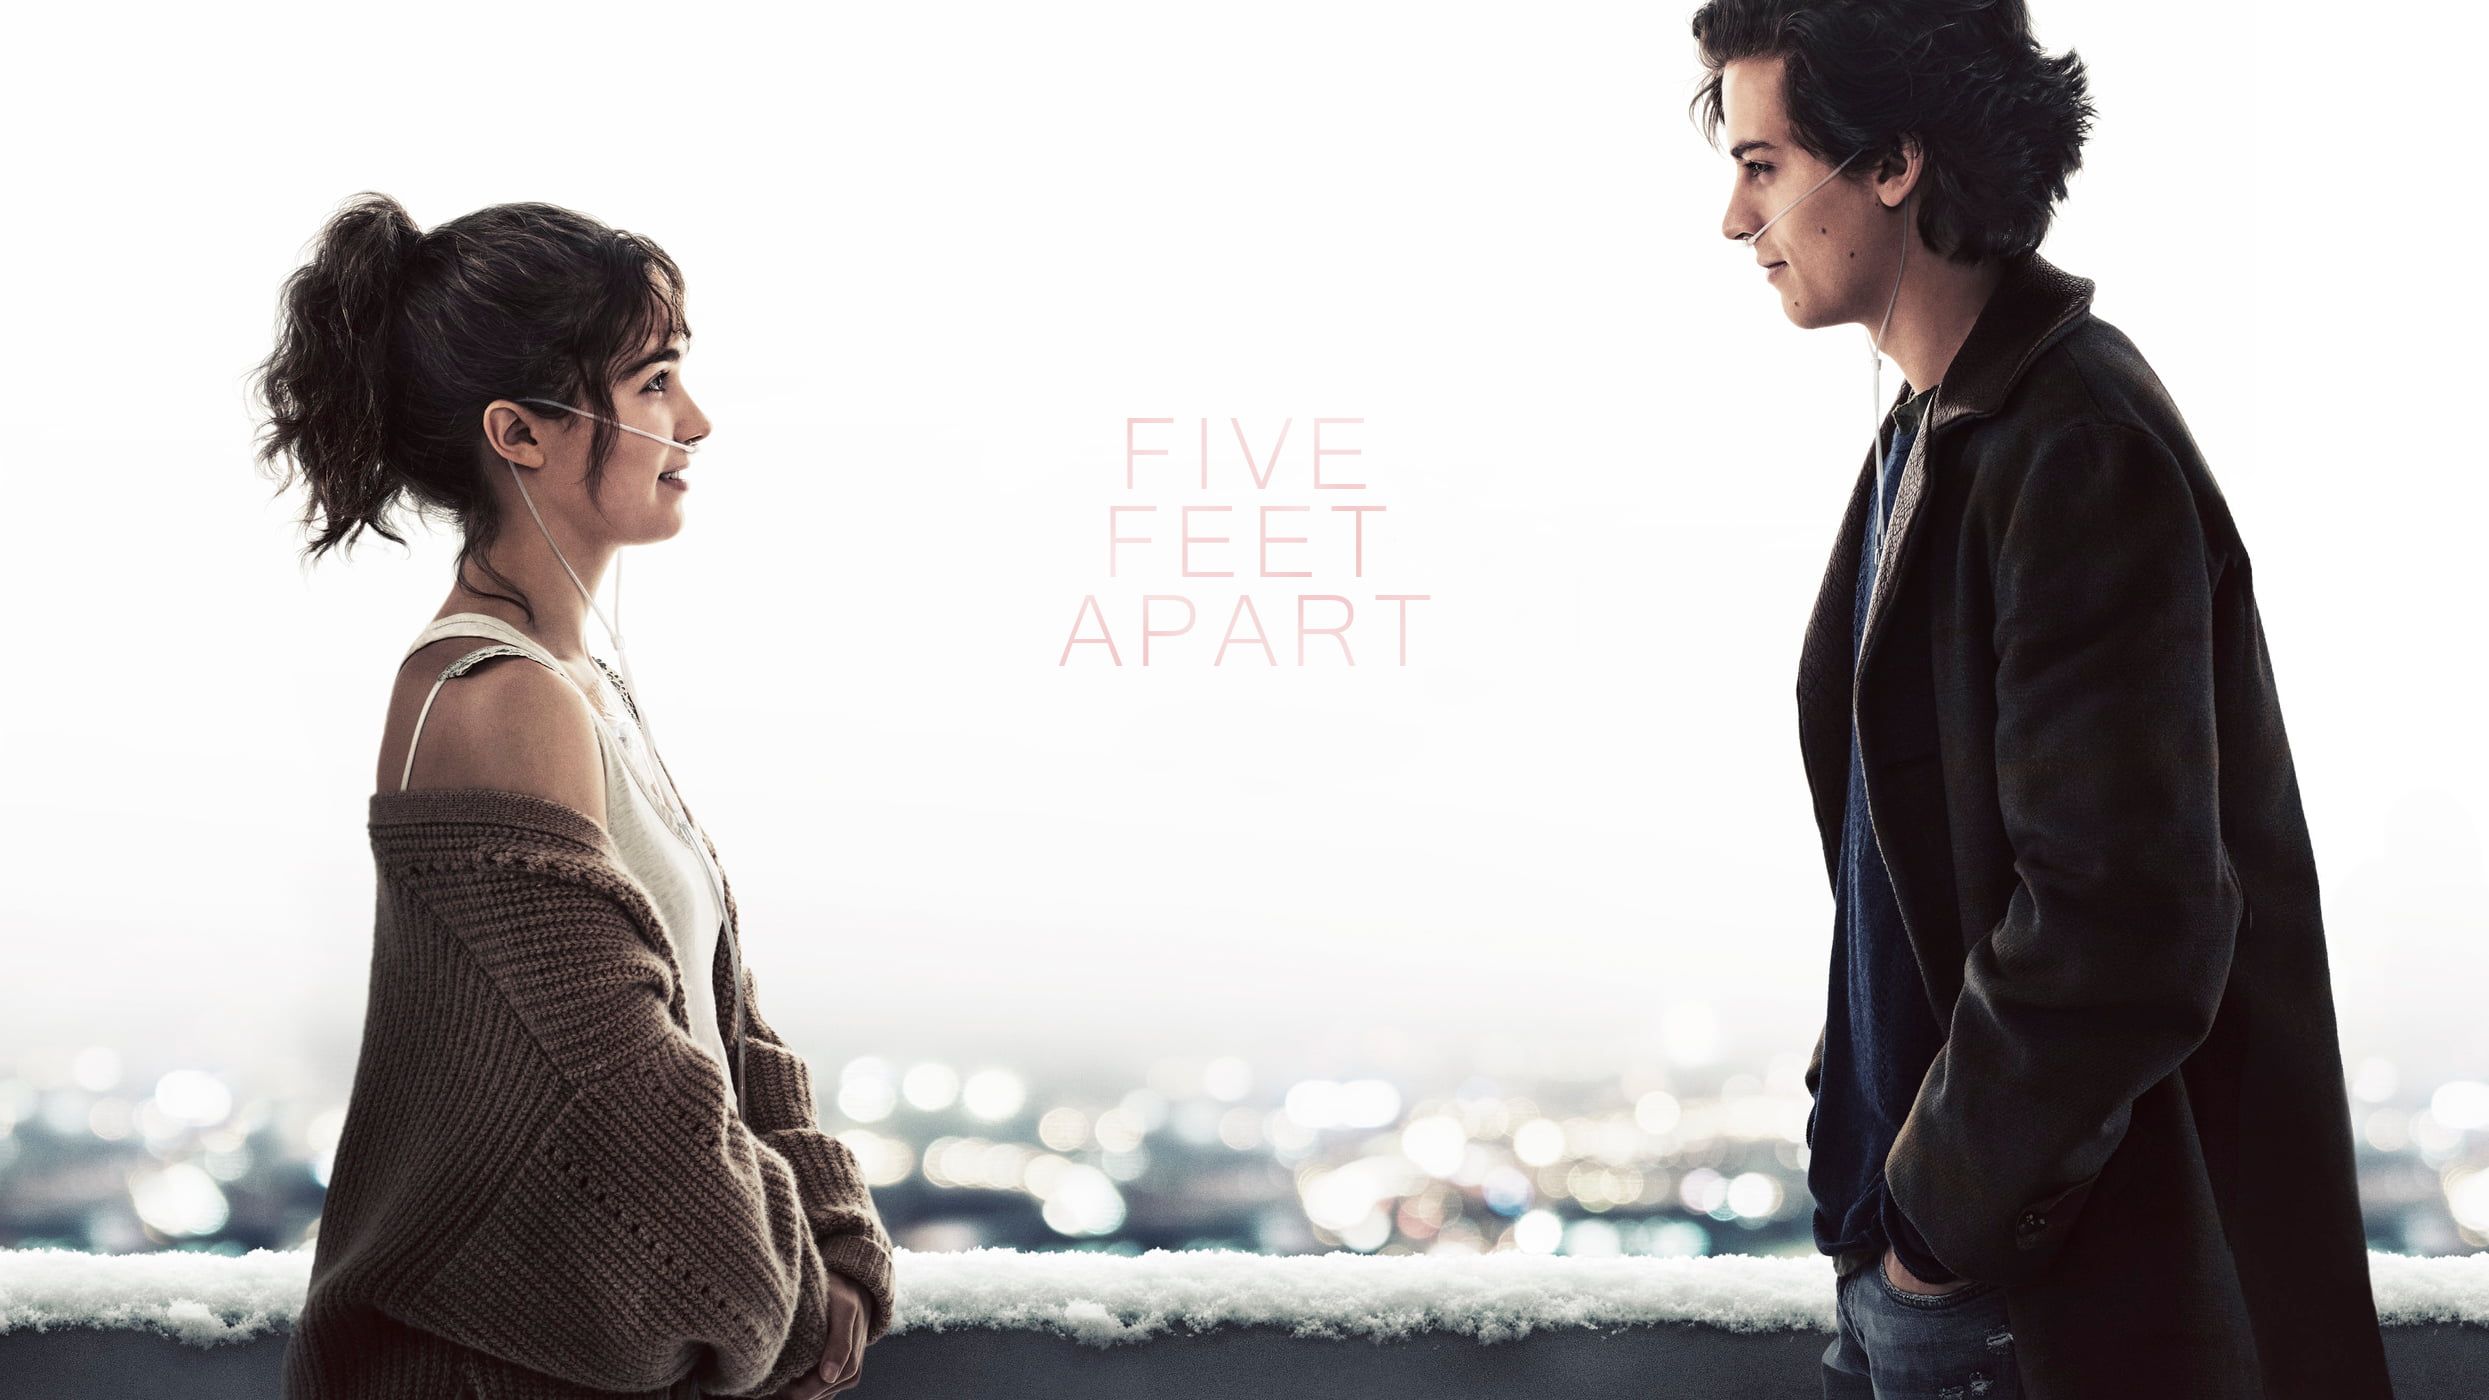 Cole Sprouse Haley Lu Richardson Five Feet Apart Stella Grant Will Newman #profile #couple #rooftops depth of field city li. Cole sprouse, Human silhouette, Apart